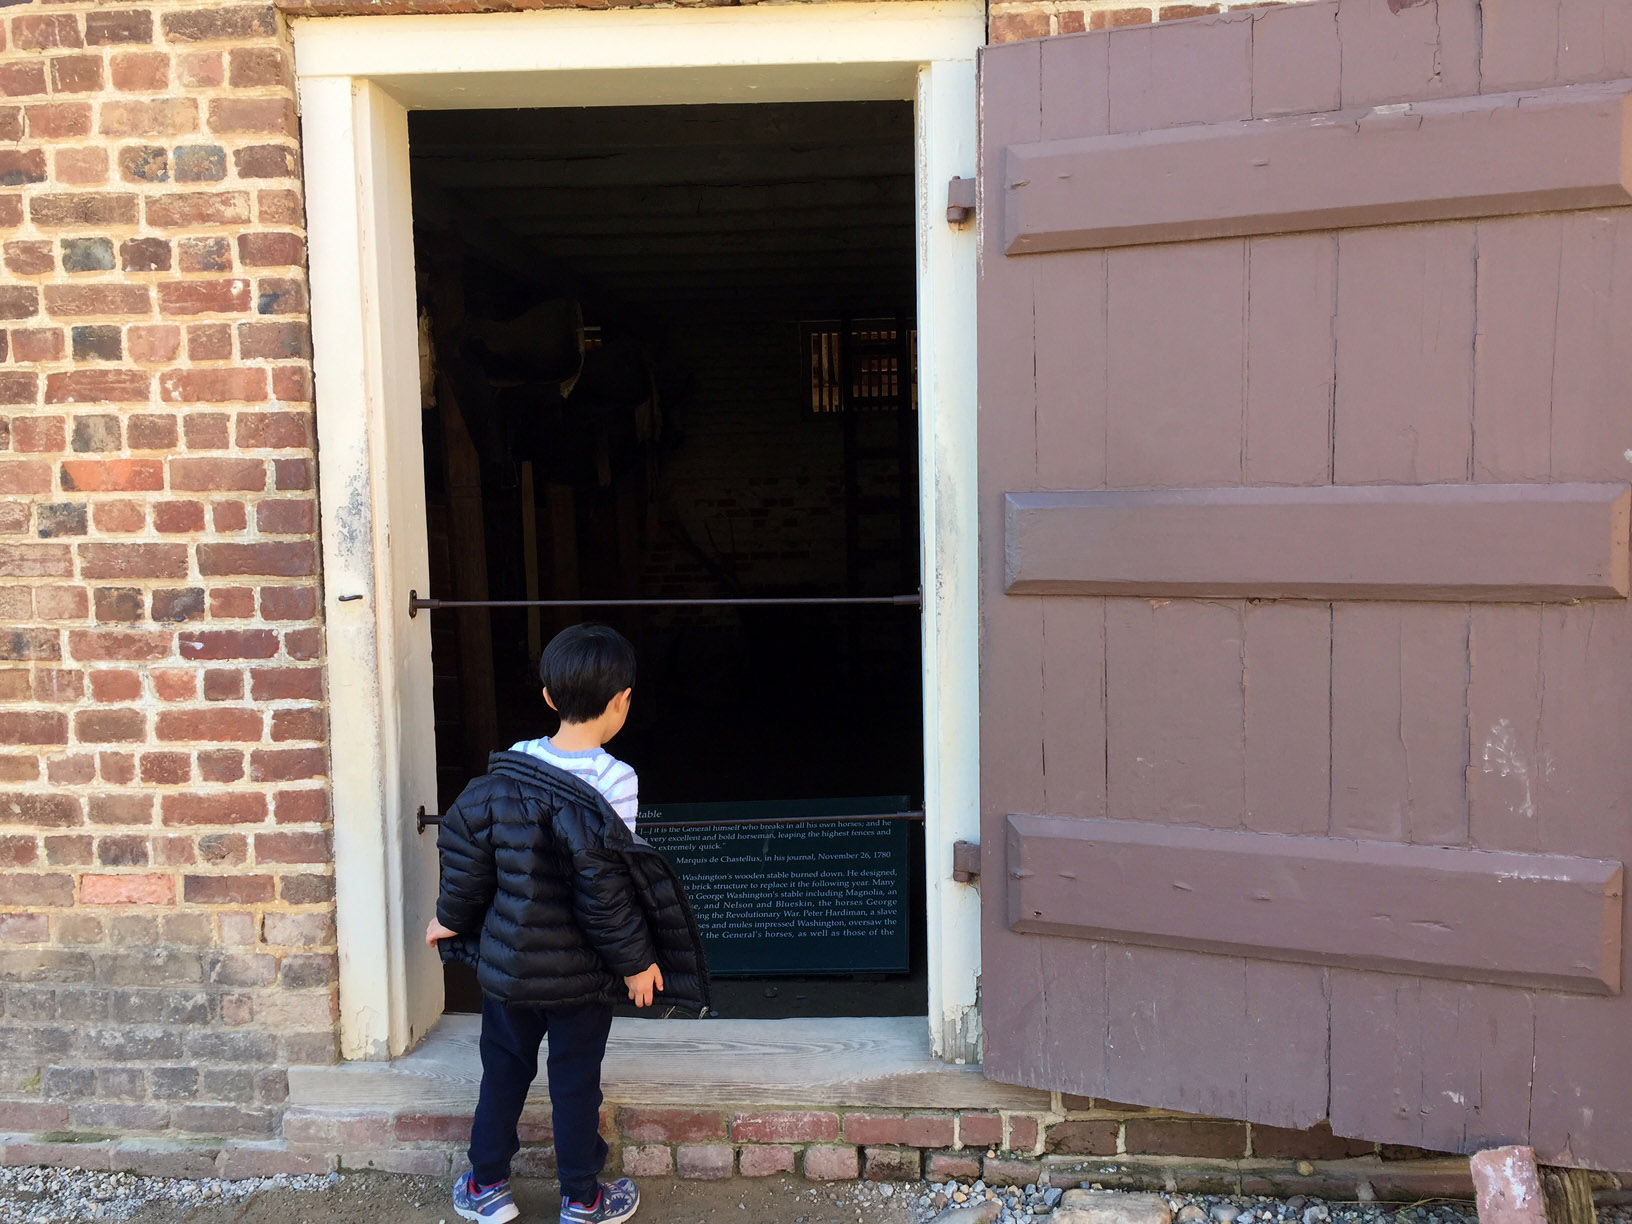 A young boy looks into a stable at Mount Vernon on Monday, Feb. 20, 2017. interior and ext of the blacksmith shop, all rising for the National Anthem at the start of the ceremony.